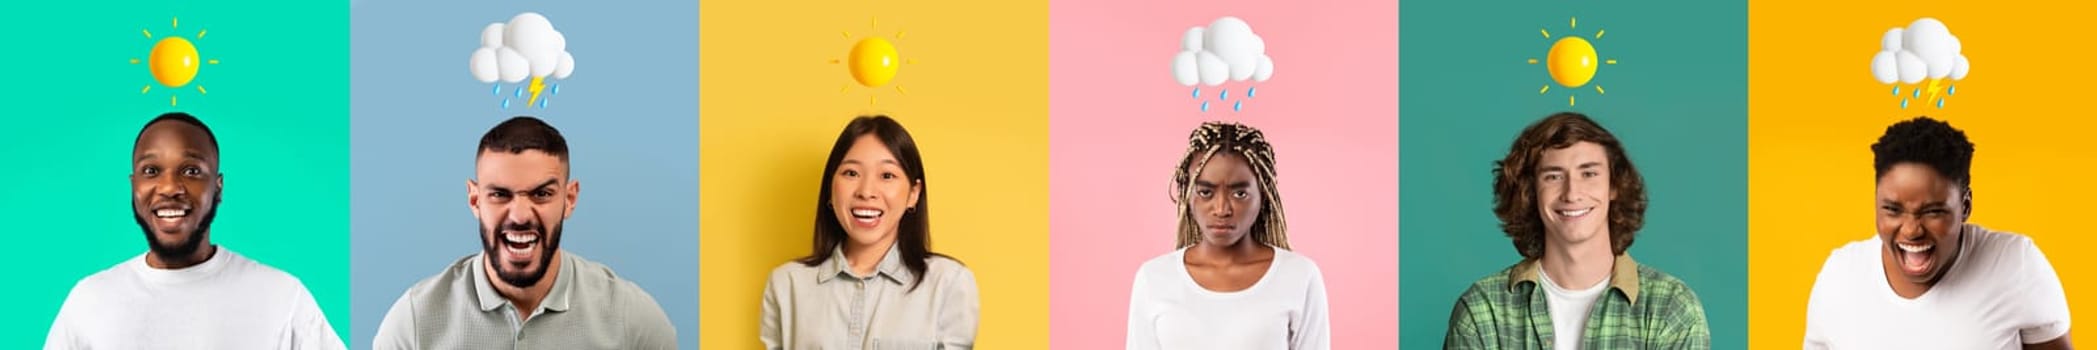 Diverse Multiethnic People With Weather Emojis Above Head Having Different Emotions, Multicultural Men And Women Feeling Happy, Angry, Sad And Anxious While Posing Over Colorful Backgrounds, Collage